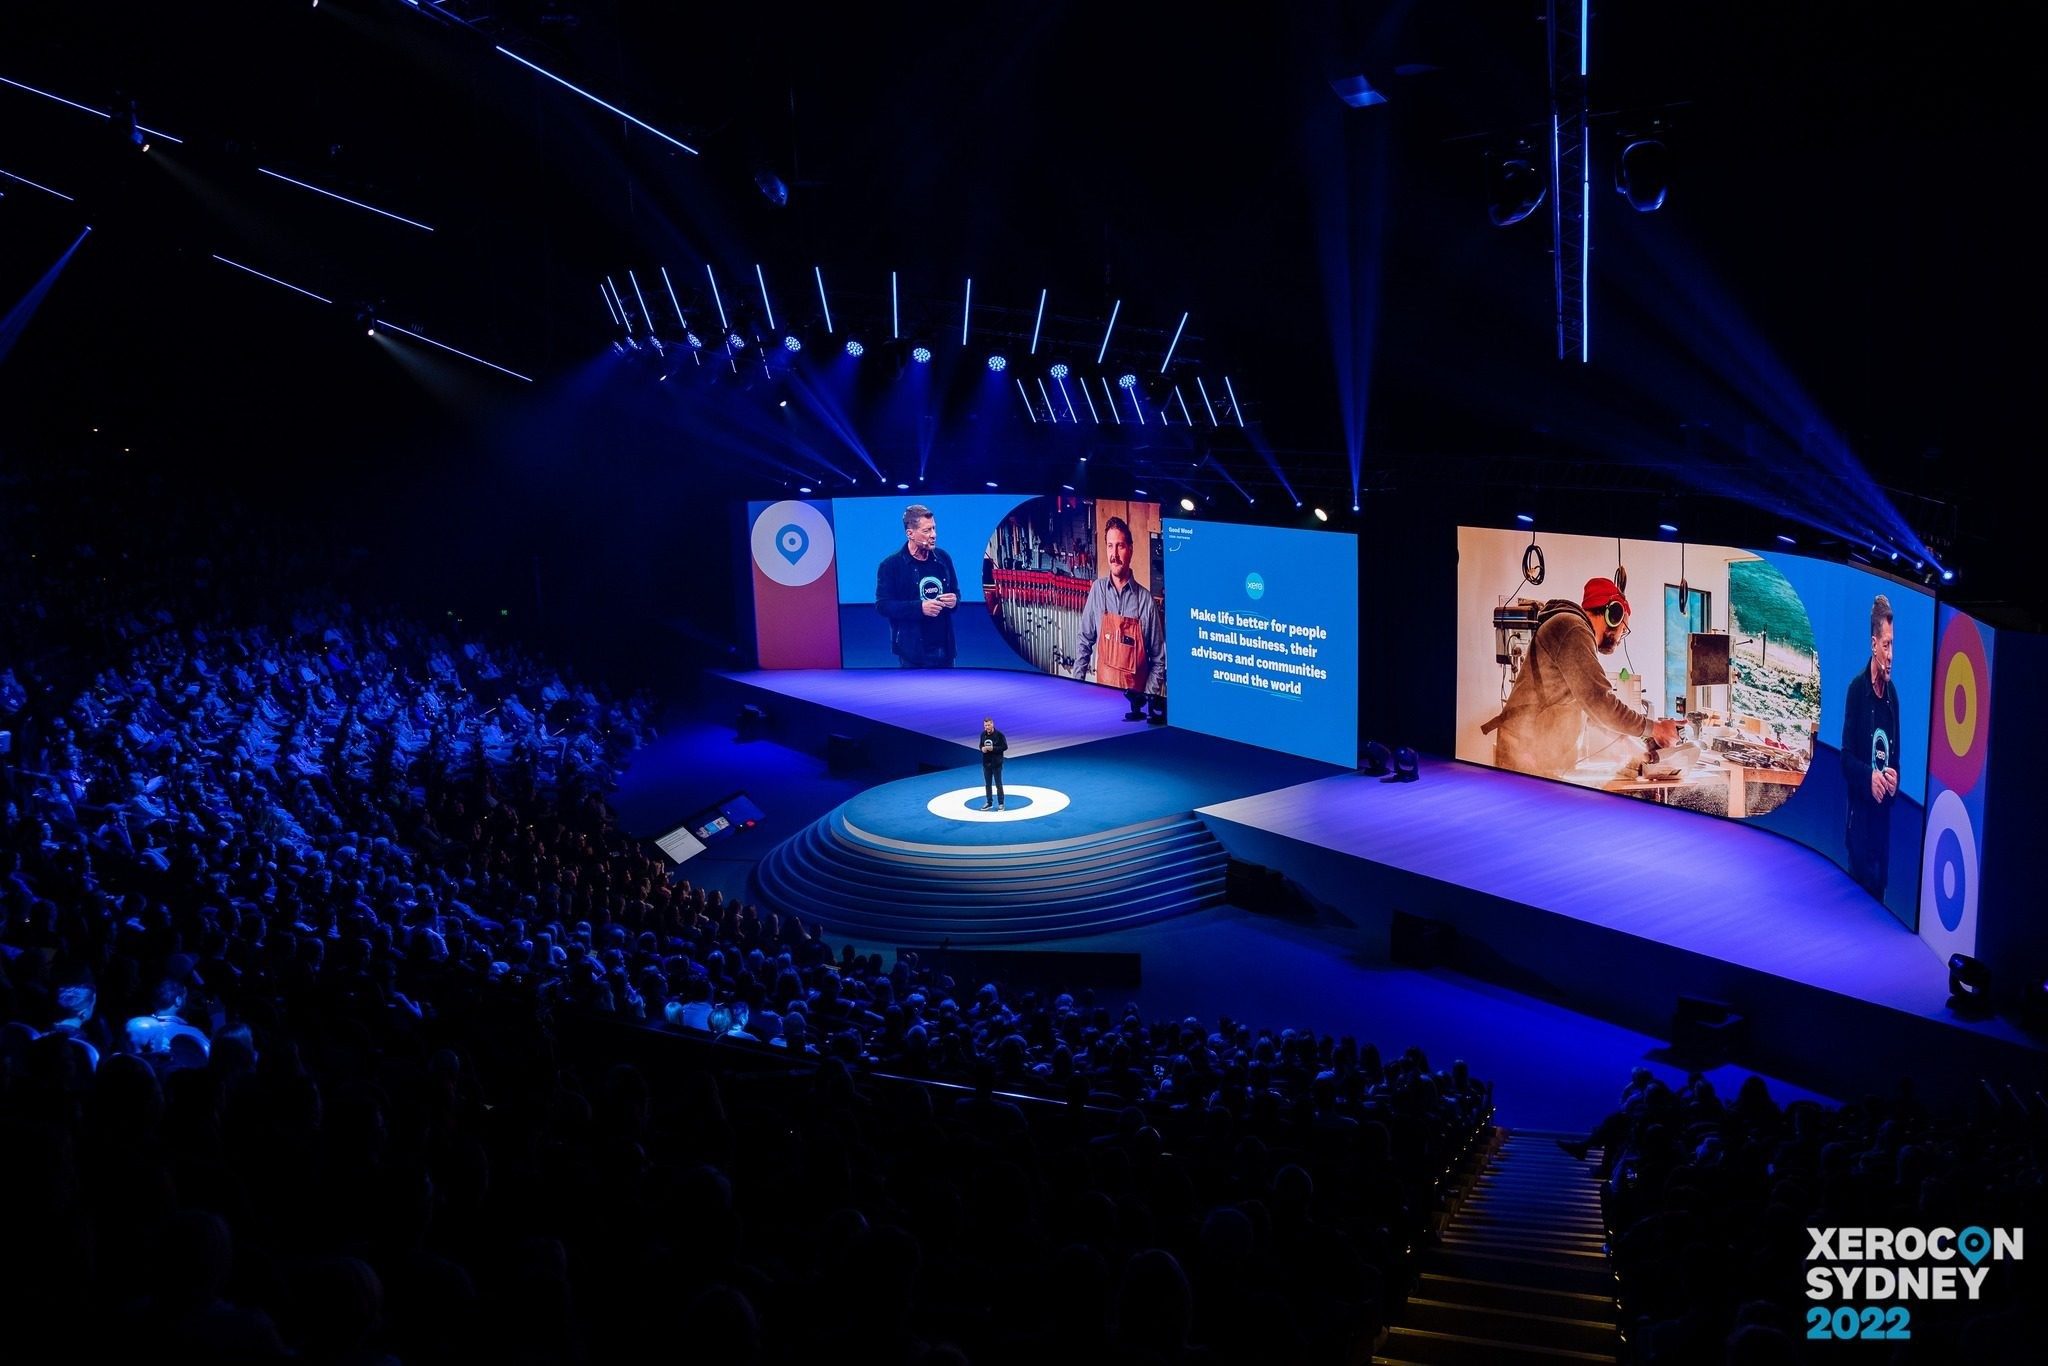 Get the most from XeroCon as an Exhibitor